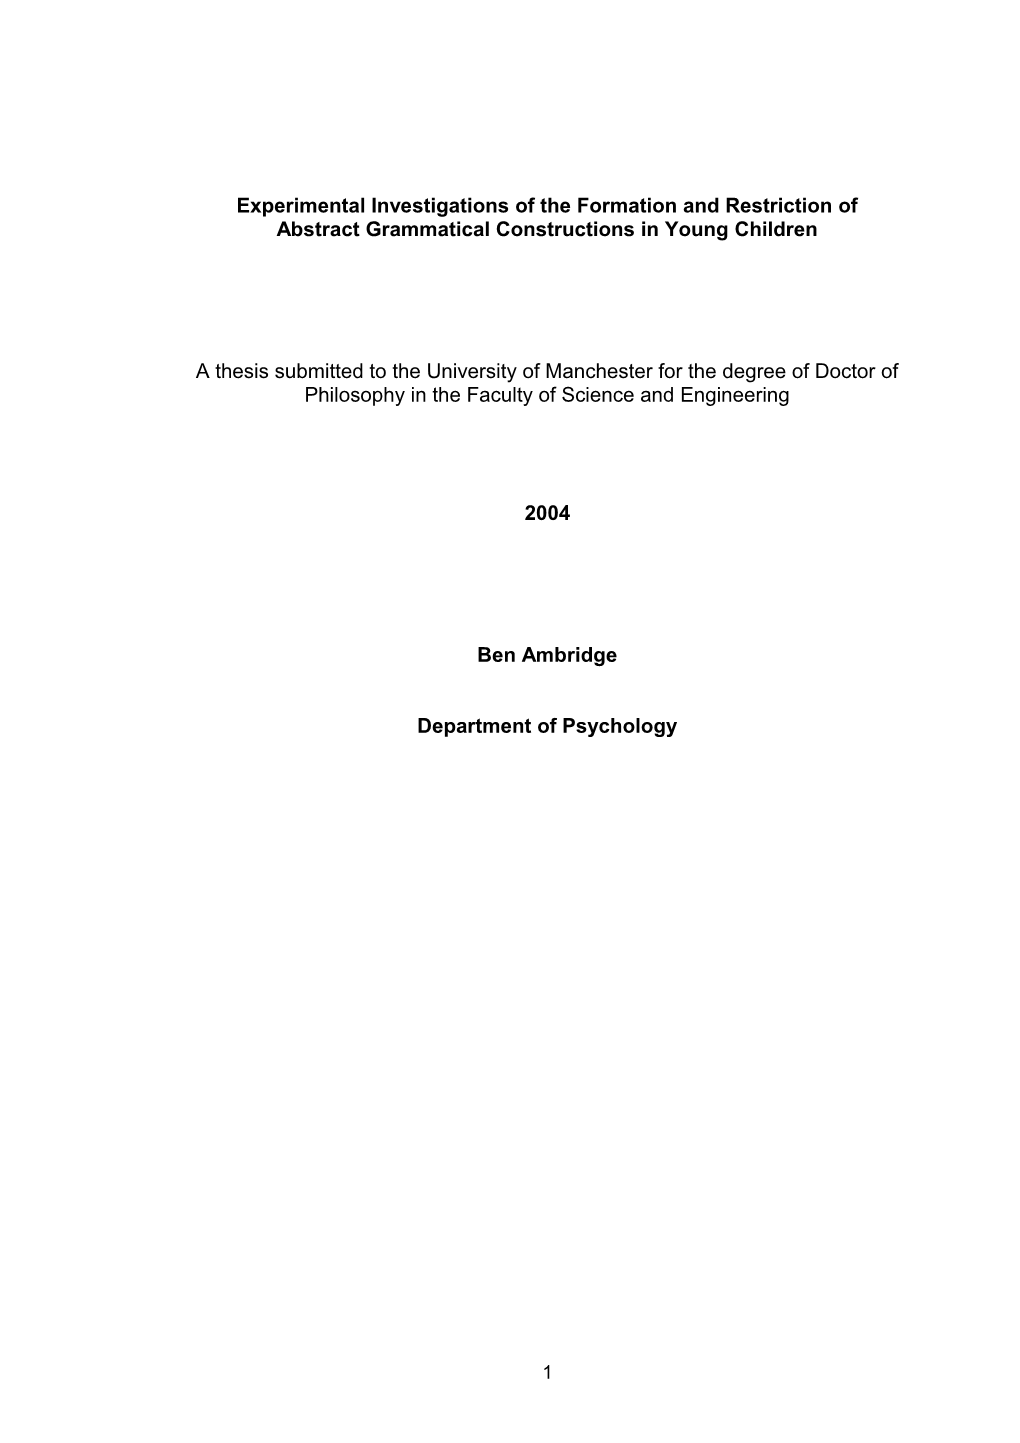 Experimental Investigations of the Formation and Restriction of Abstract Grammatical